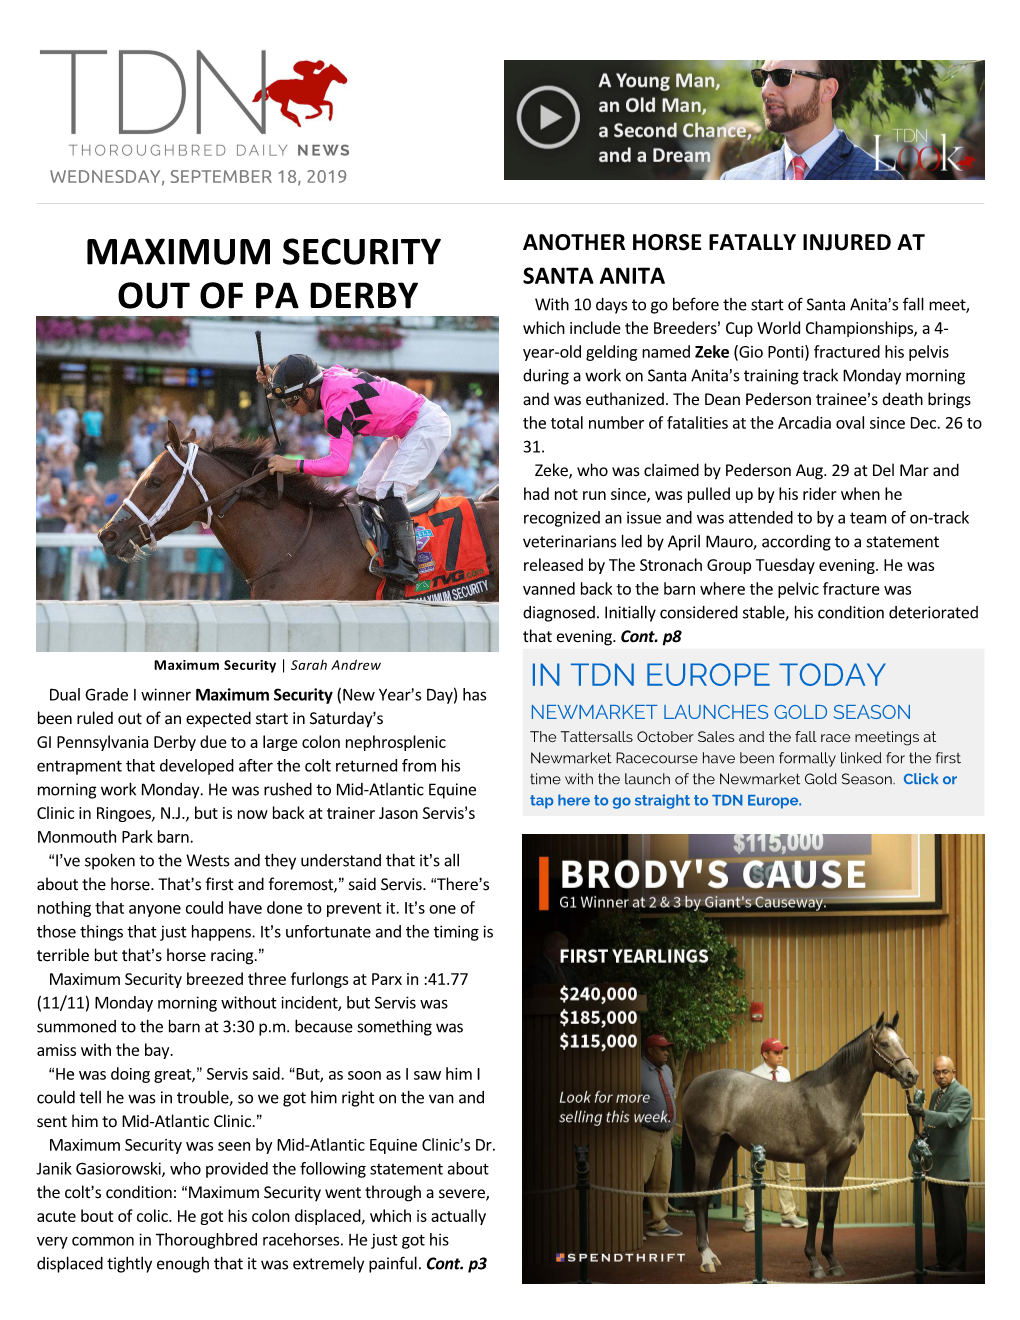 Maximum Security out of PA Derby Cont